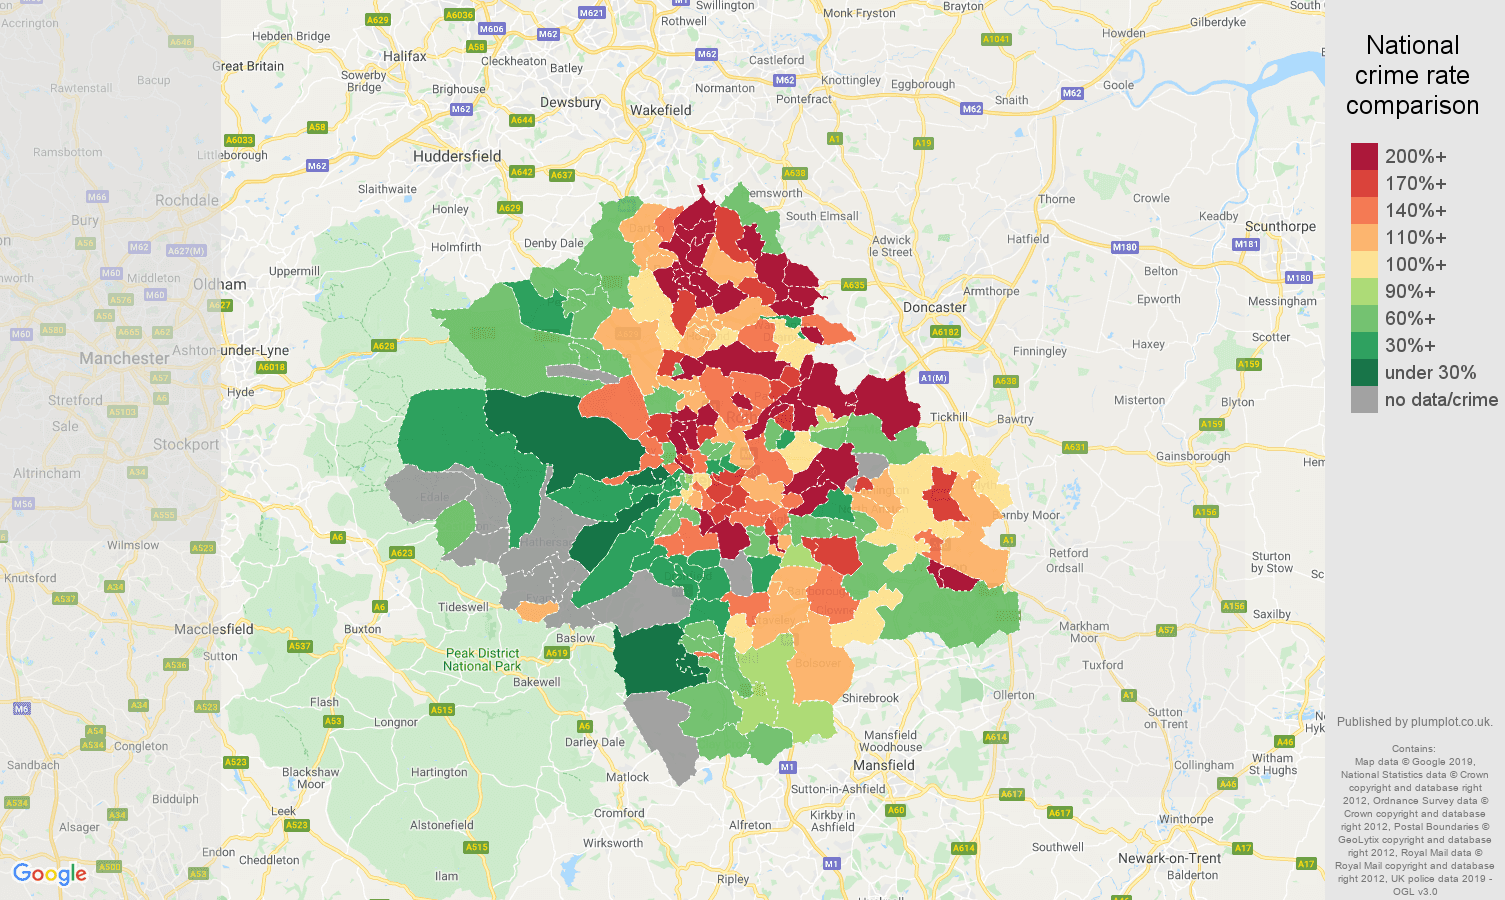 Sheffield other crime rate comparison map